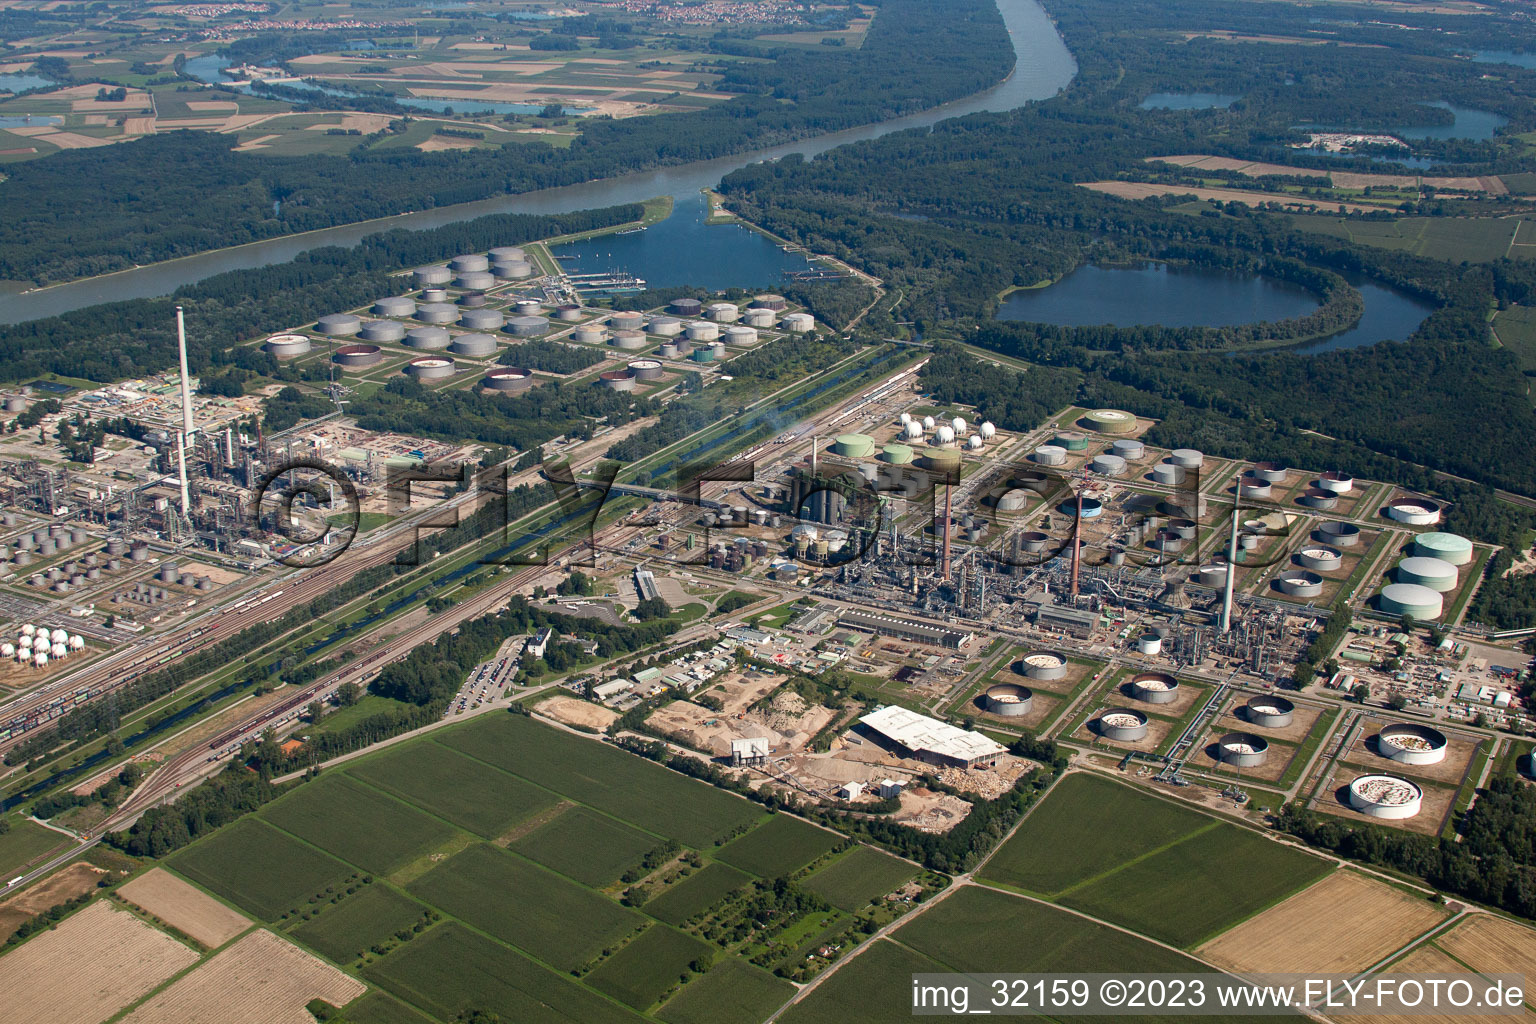 Aerial photograpy of OMV refinery in the district Knielingen in Karlsruhe in the state Baden-Wuerttemberg, Germany